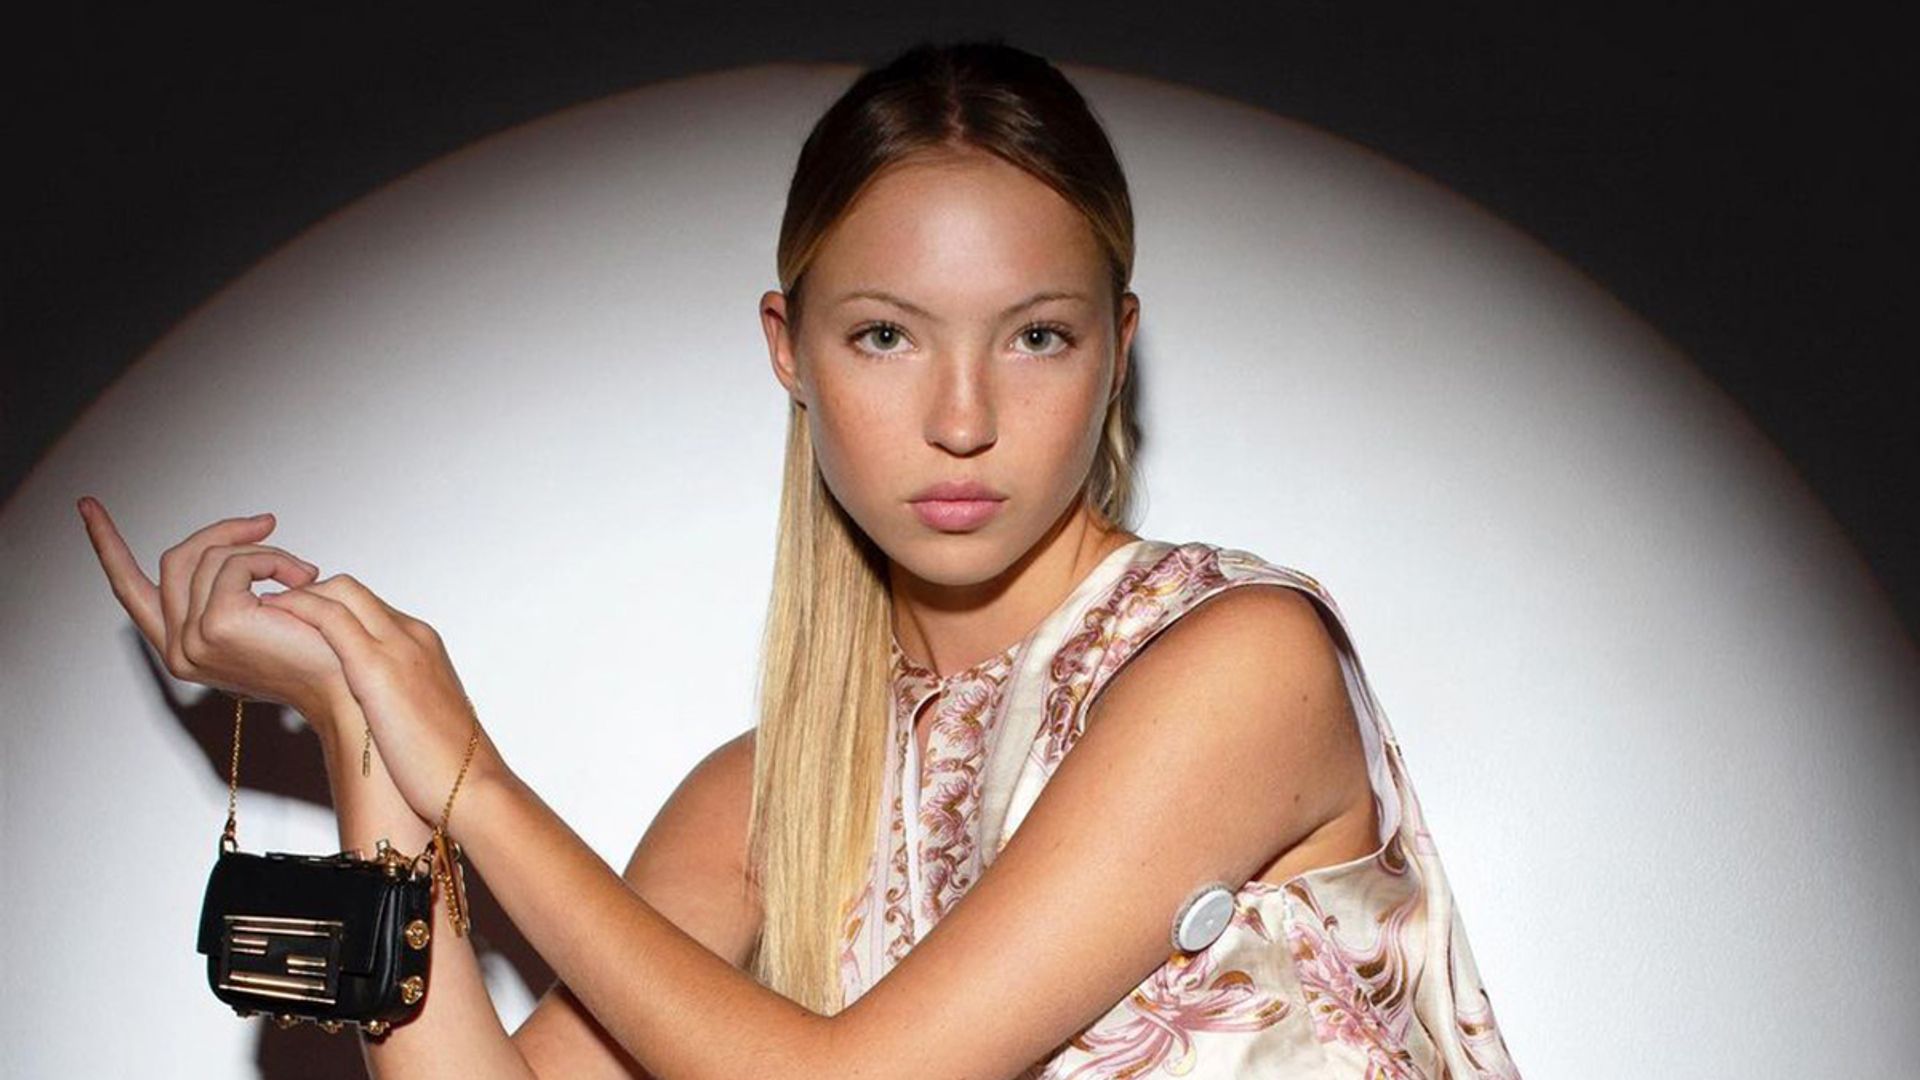 Lila Moss shows her diabetes monitor in picture for latest Fendi and Versace collab campaign